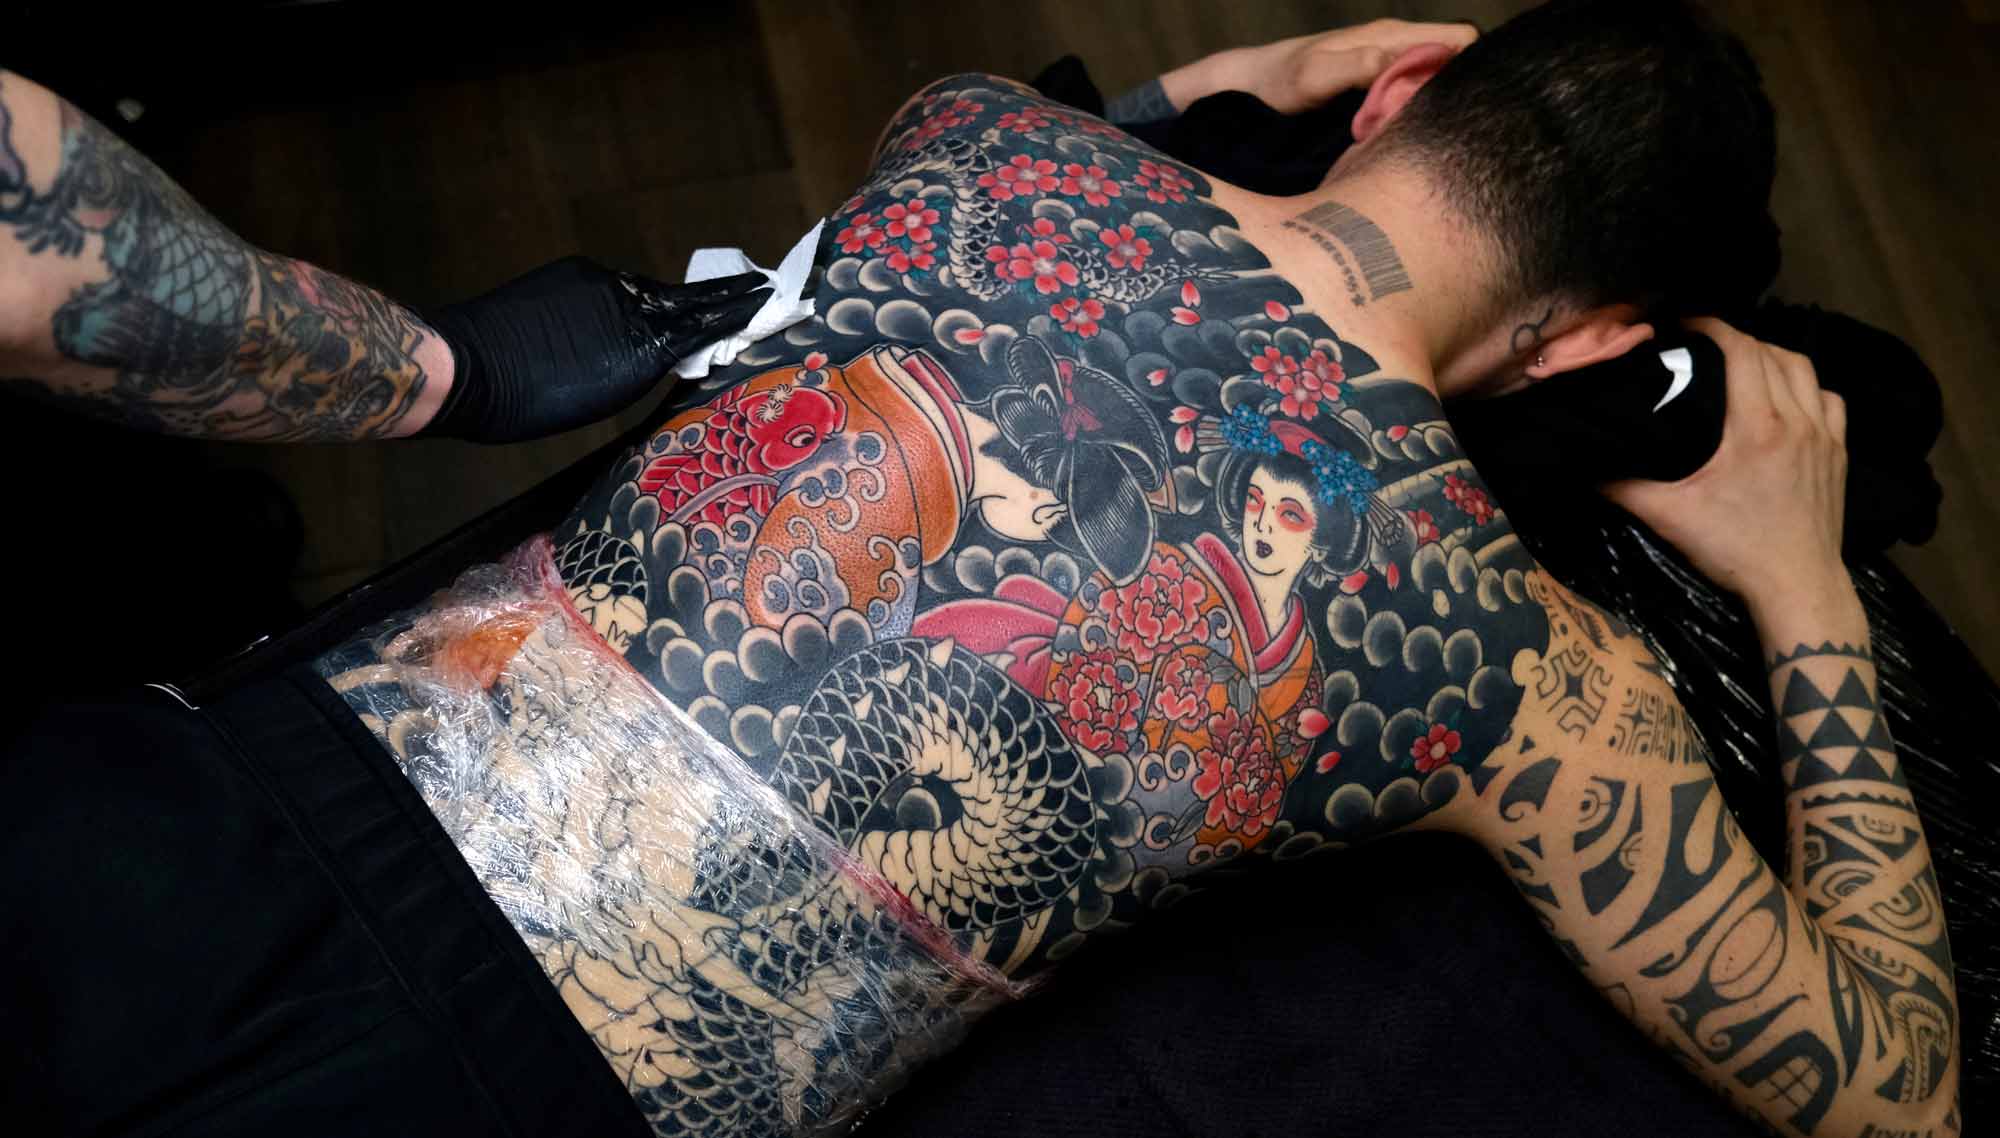 Swen Losinsky working on some japanese Cover-Up tattoos in Berlin at Good Old Times Tattoo Studio 